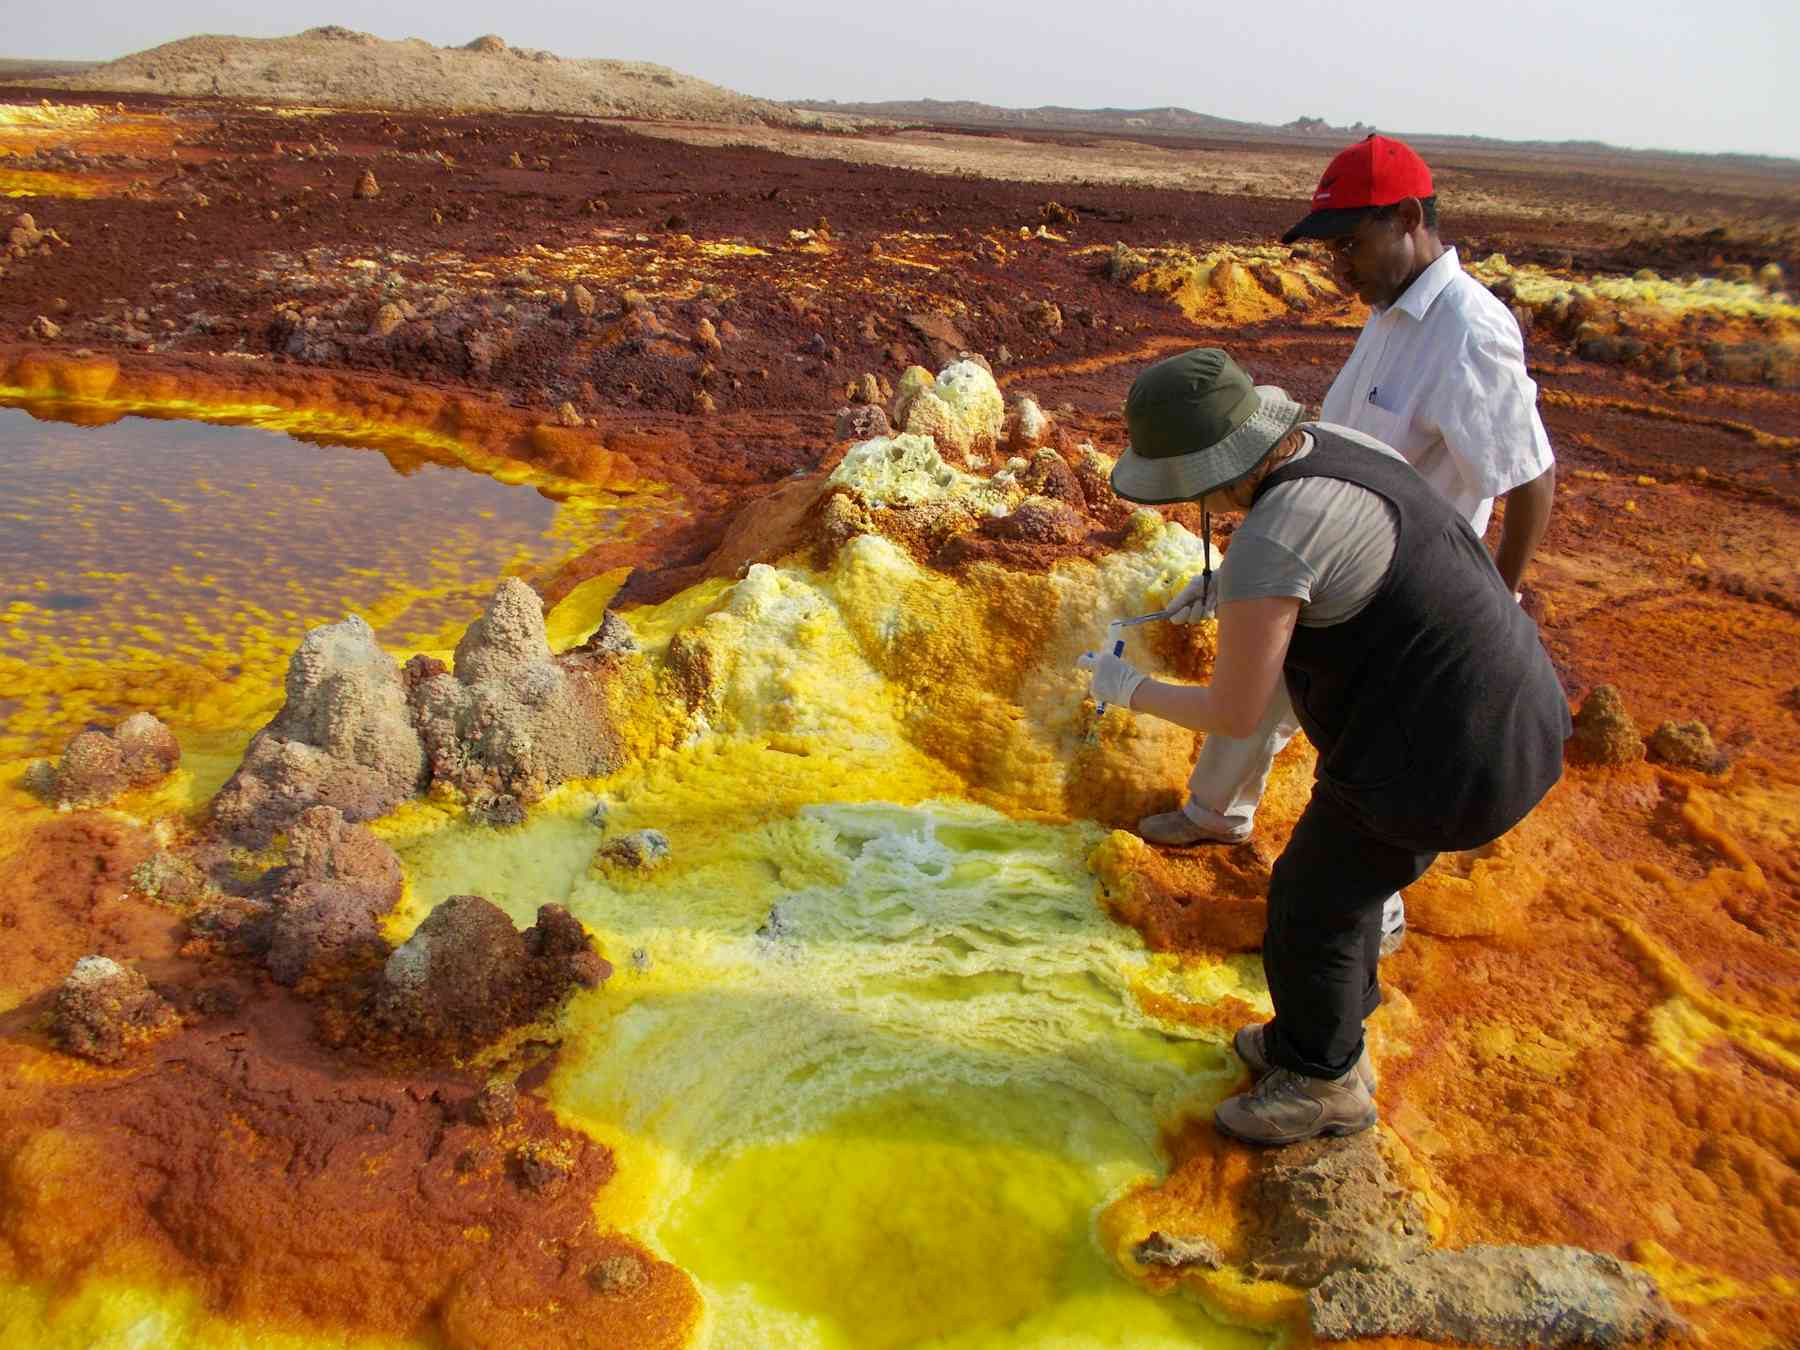 Ethiopia’s inhospitable Danakil Depression gives us clues about life on ...